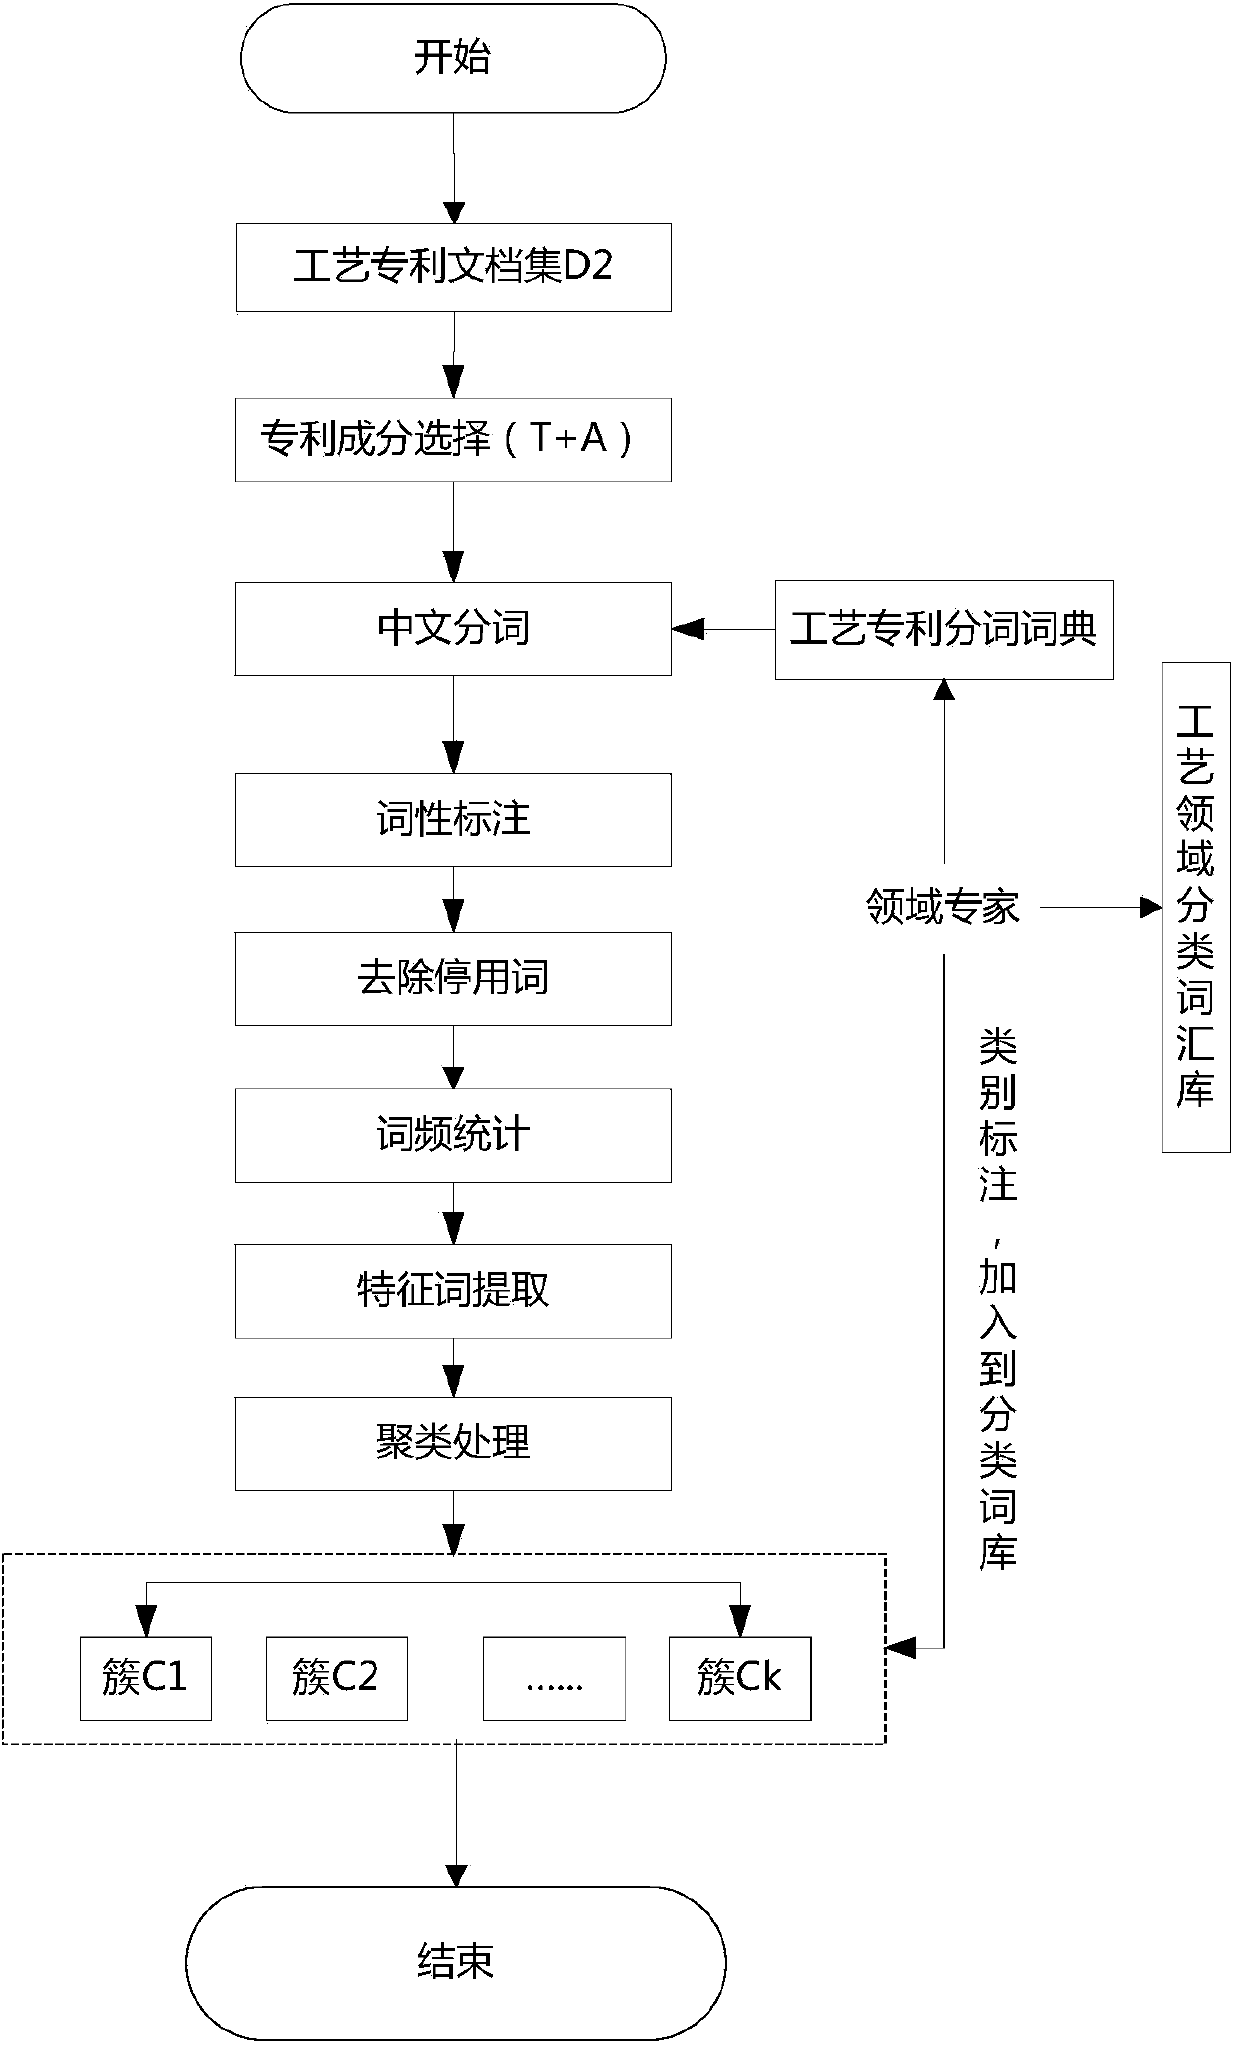 Chinese technology patent automatic classification system and method for patent classification by using system